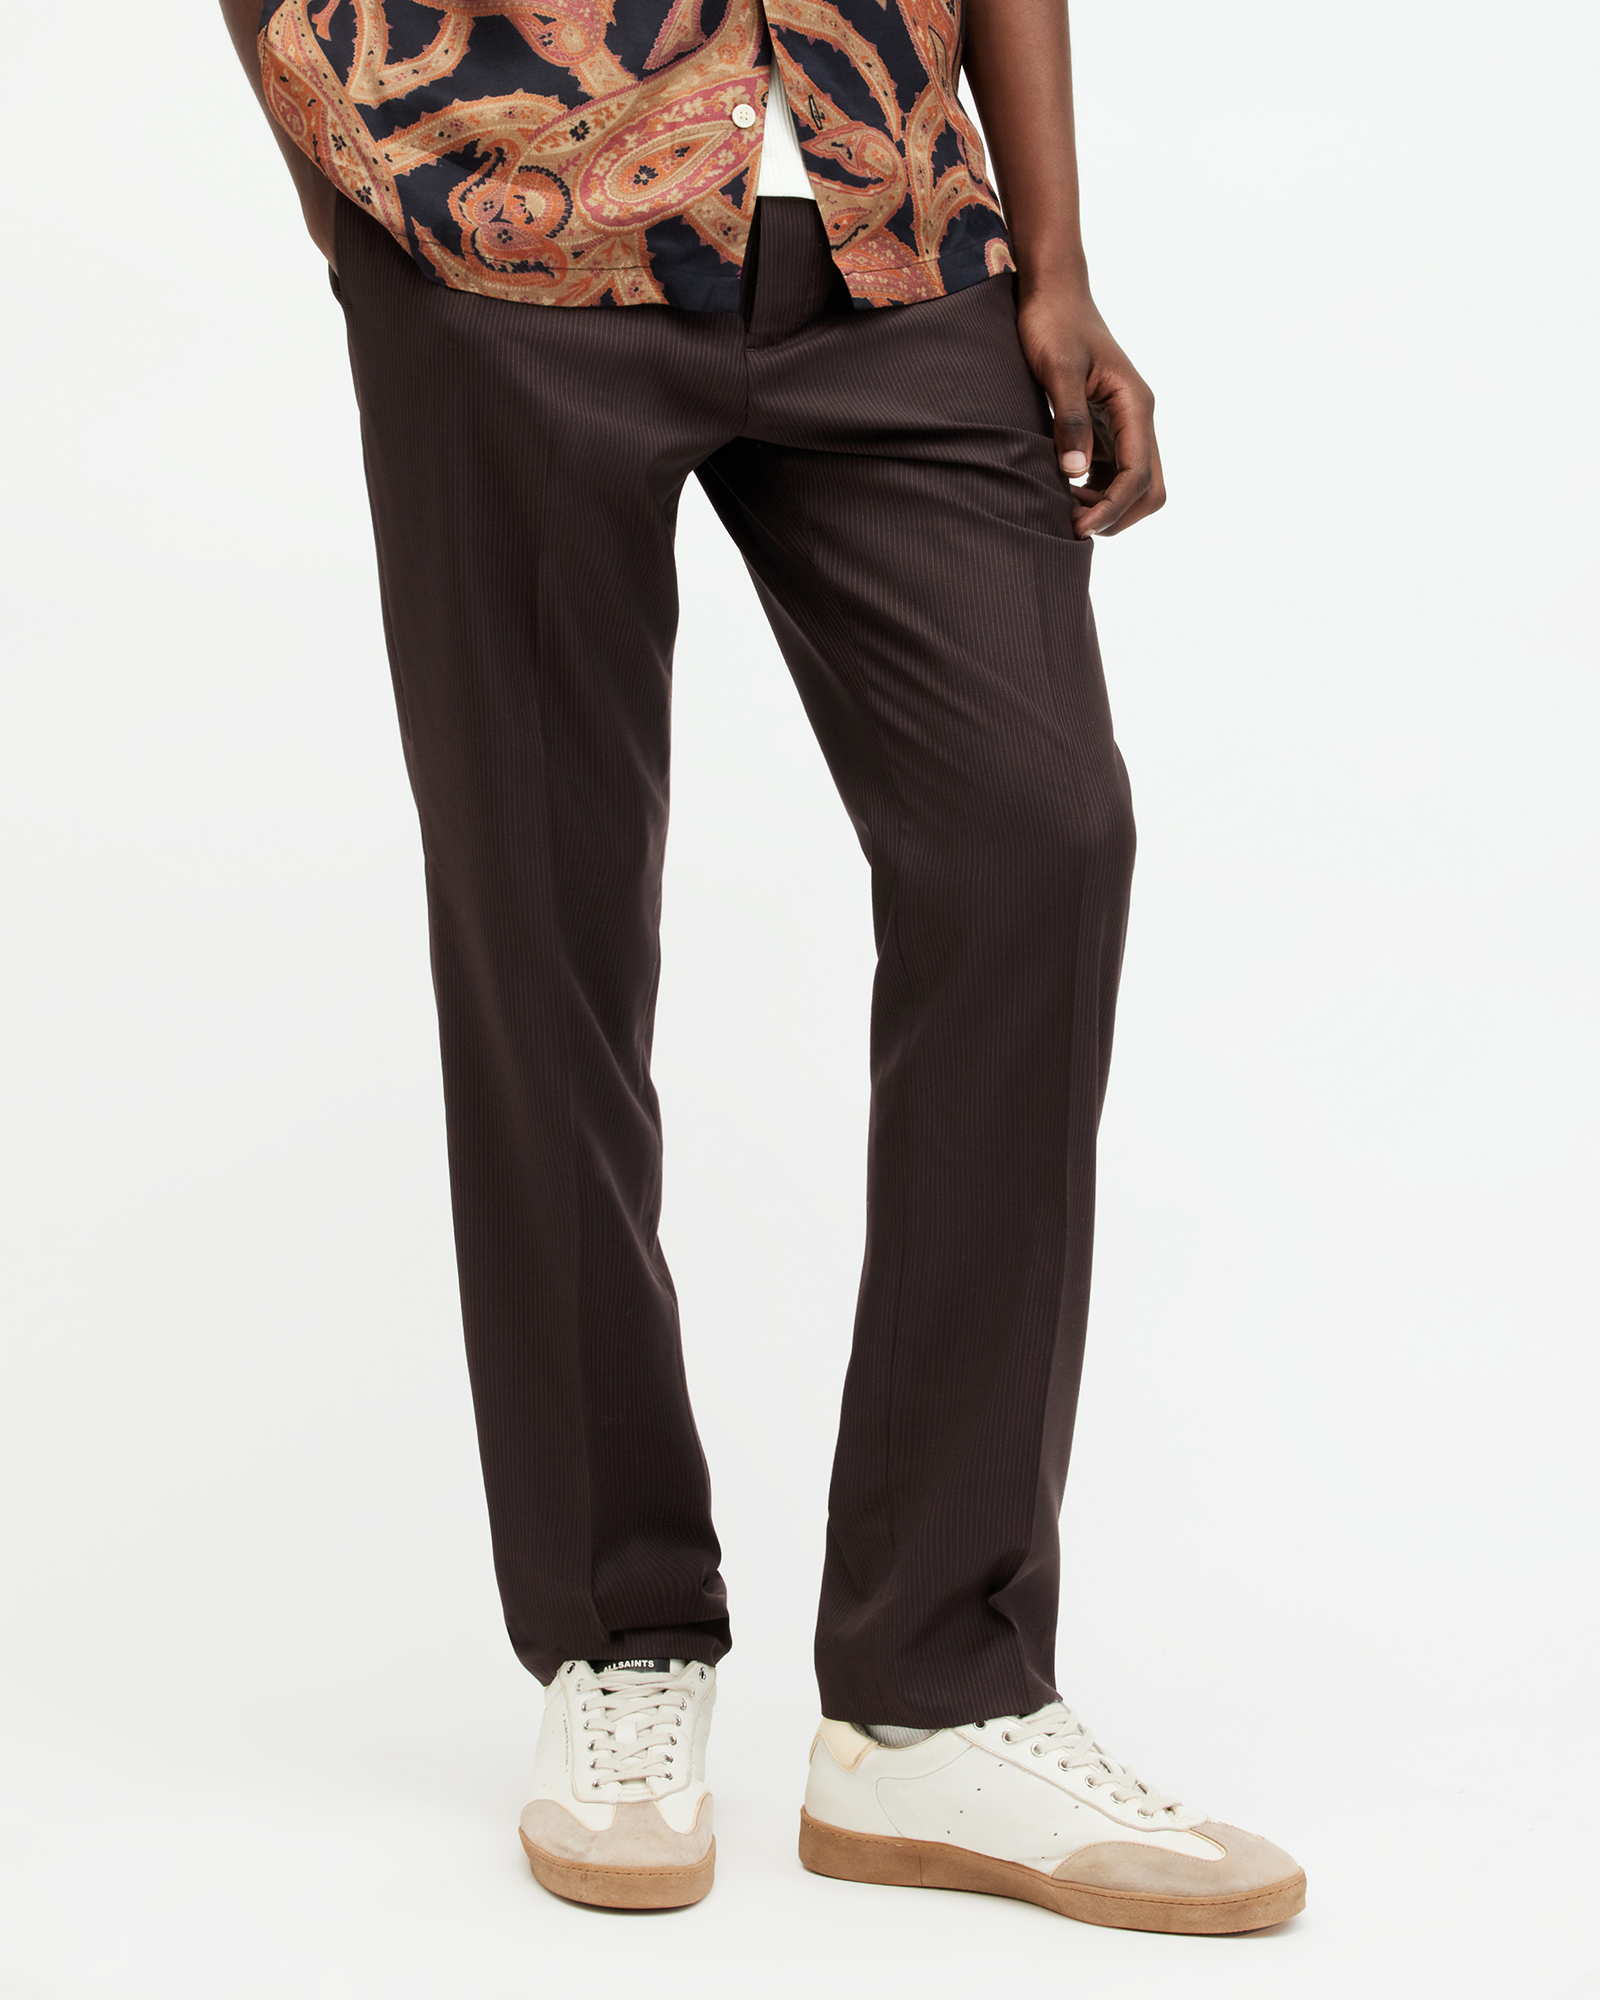 AllSaints Thorpe Pinstriped Straight Fit Trousers,, Tan Brown